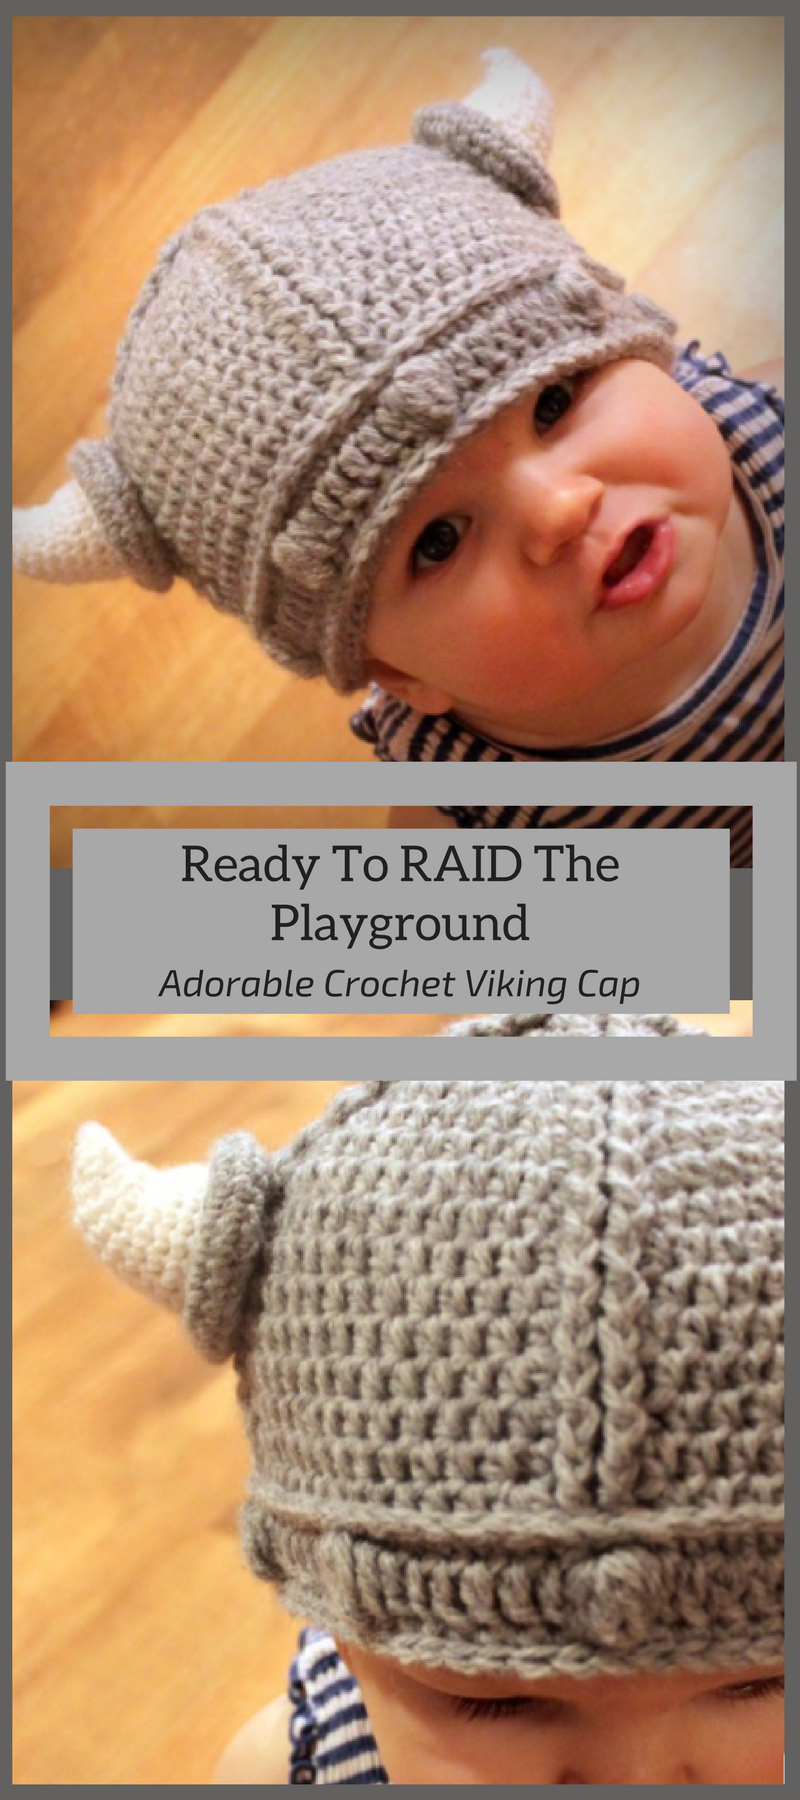 Crochet Baby Viking Hat Pattern Adorable Viking Crochet Pattern Hat Perfect For The Little Ones